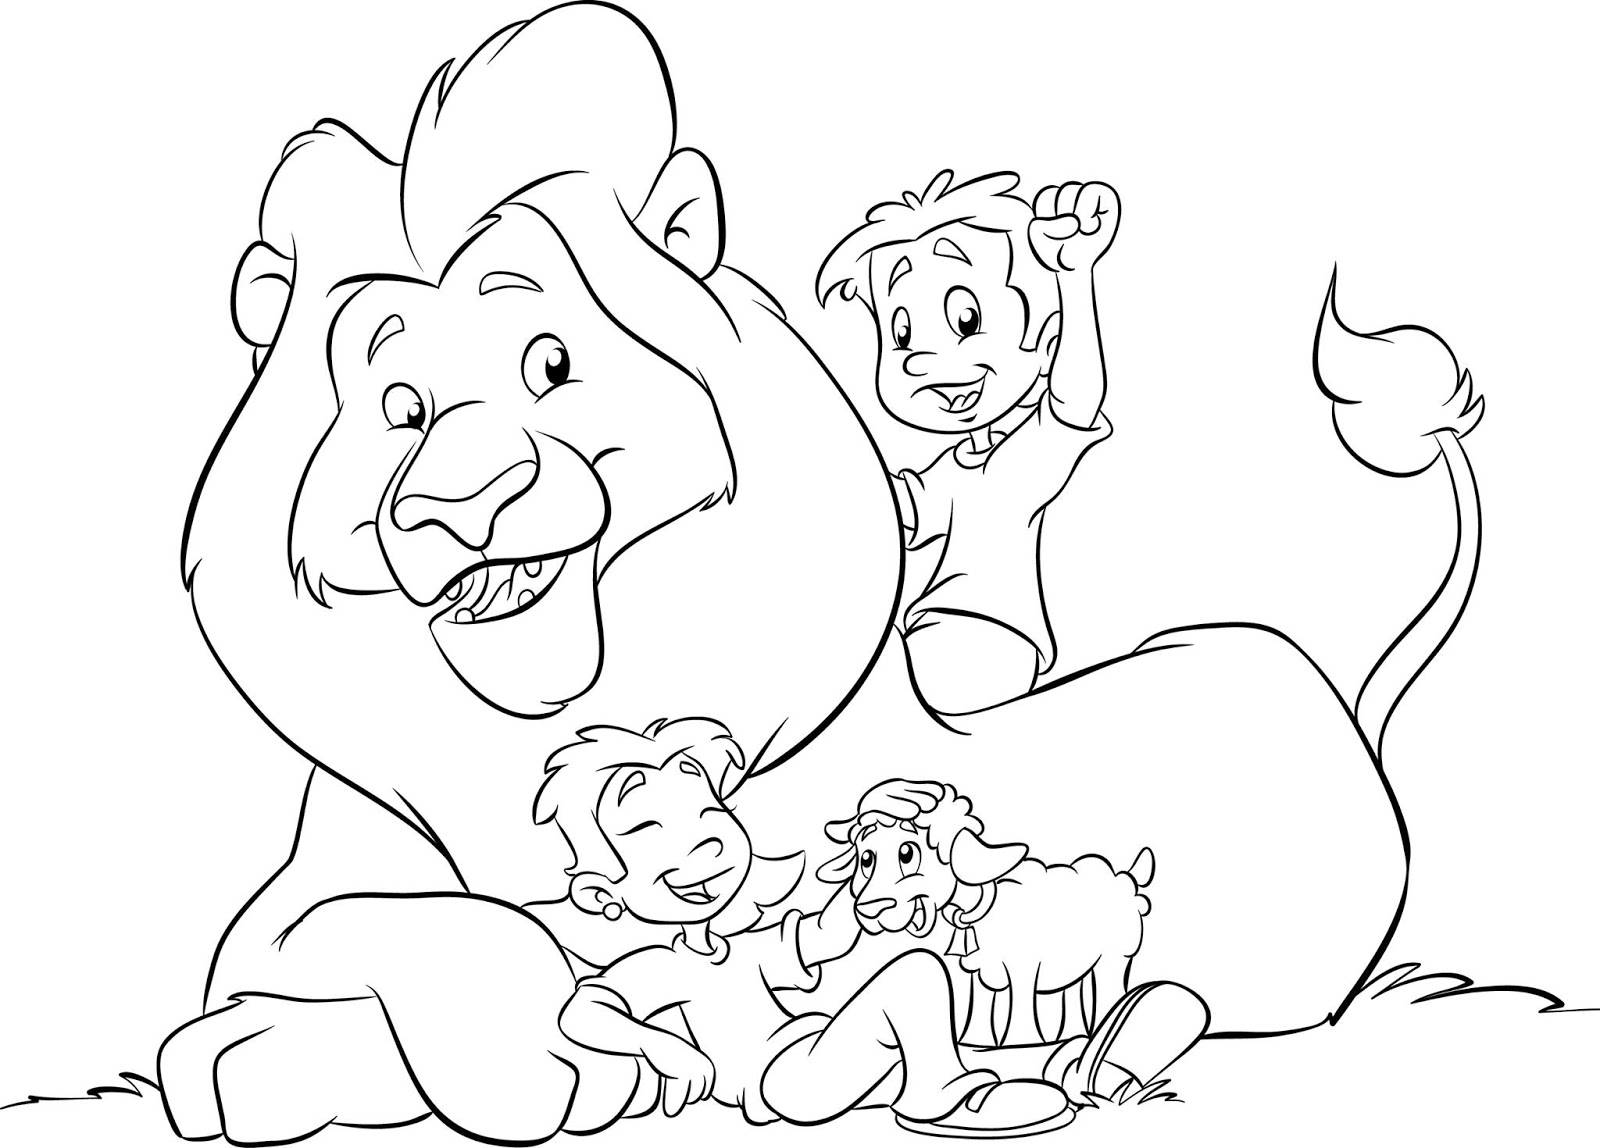 HWFD - Lion and Lamb Coloring Pages For Desktop | HD Wallapapers Free